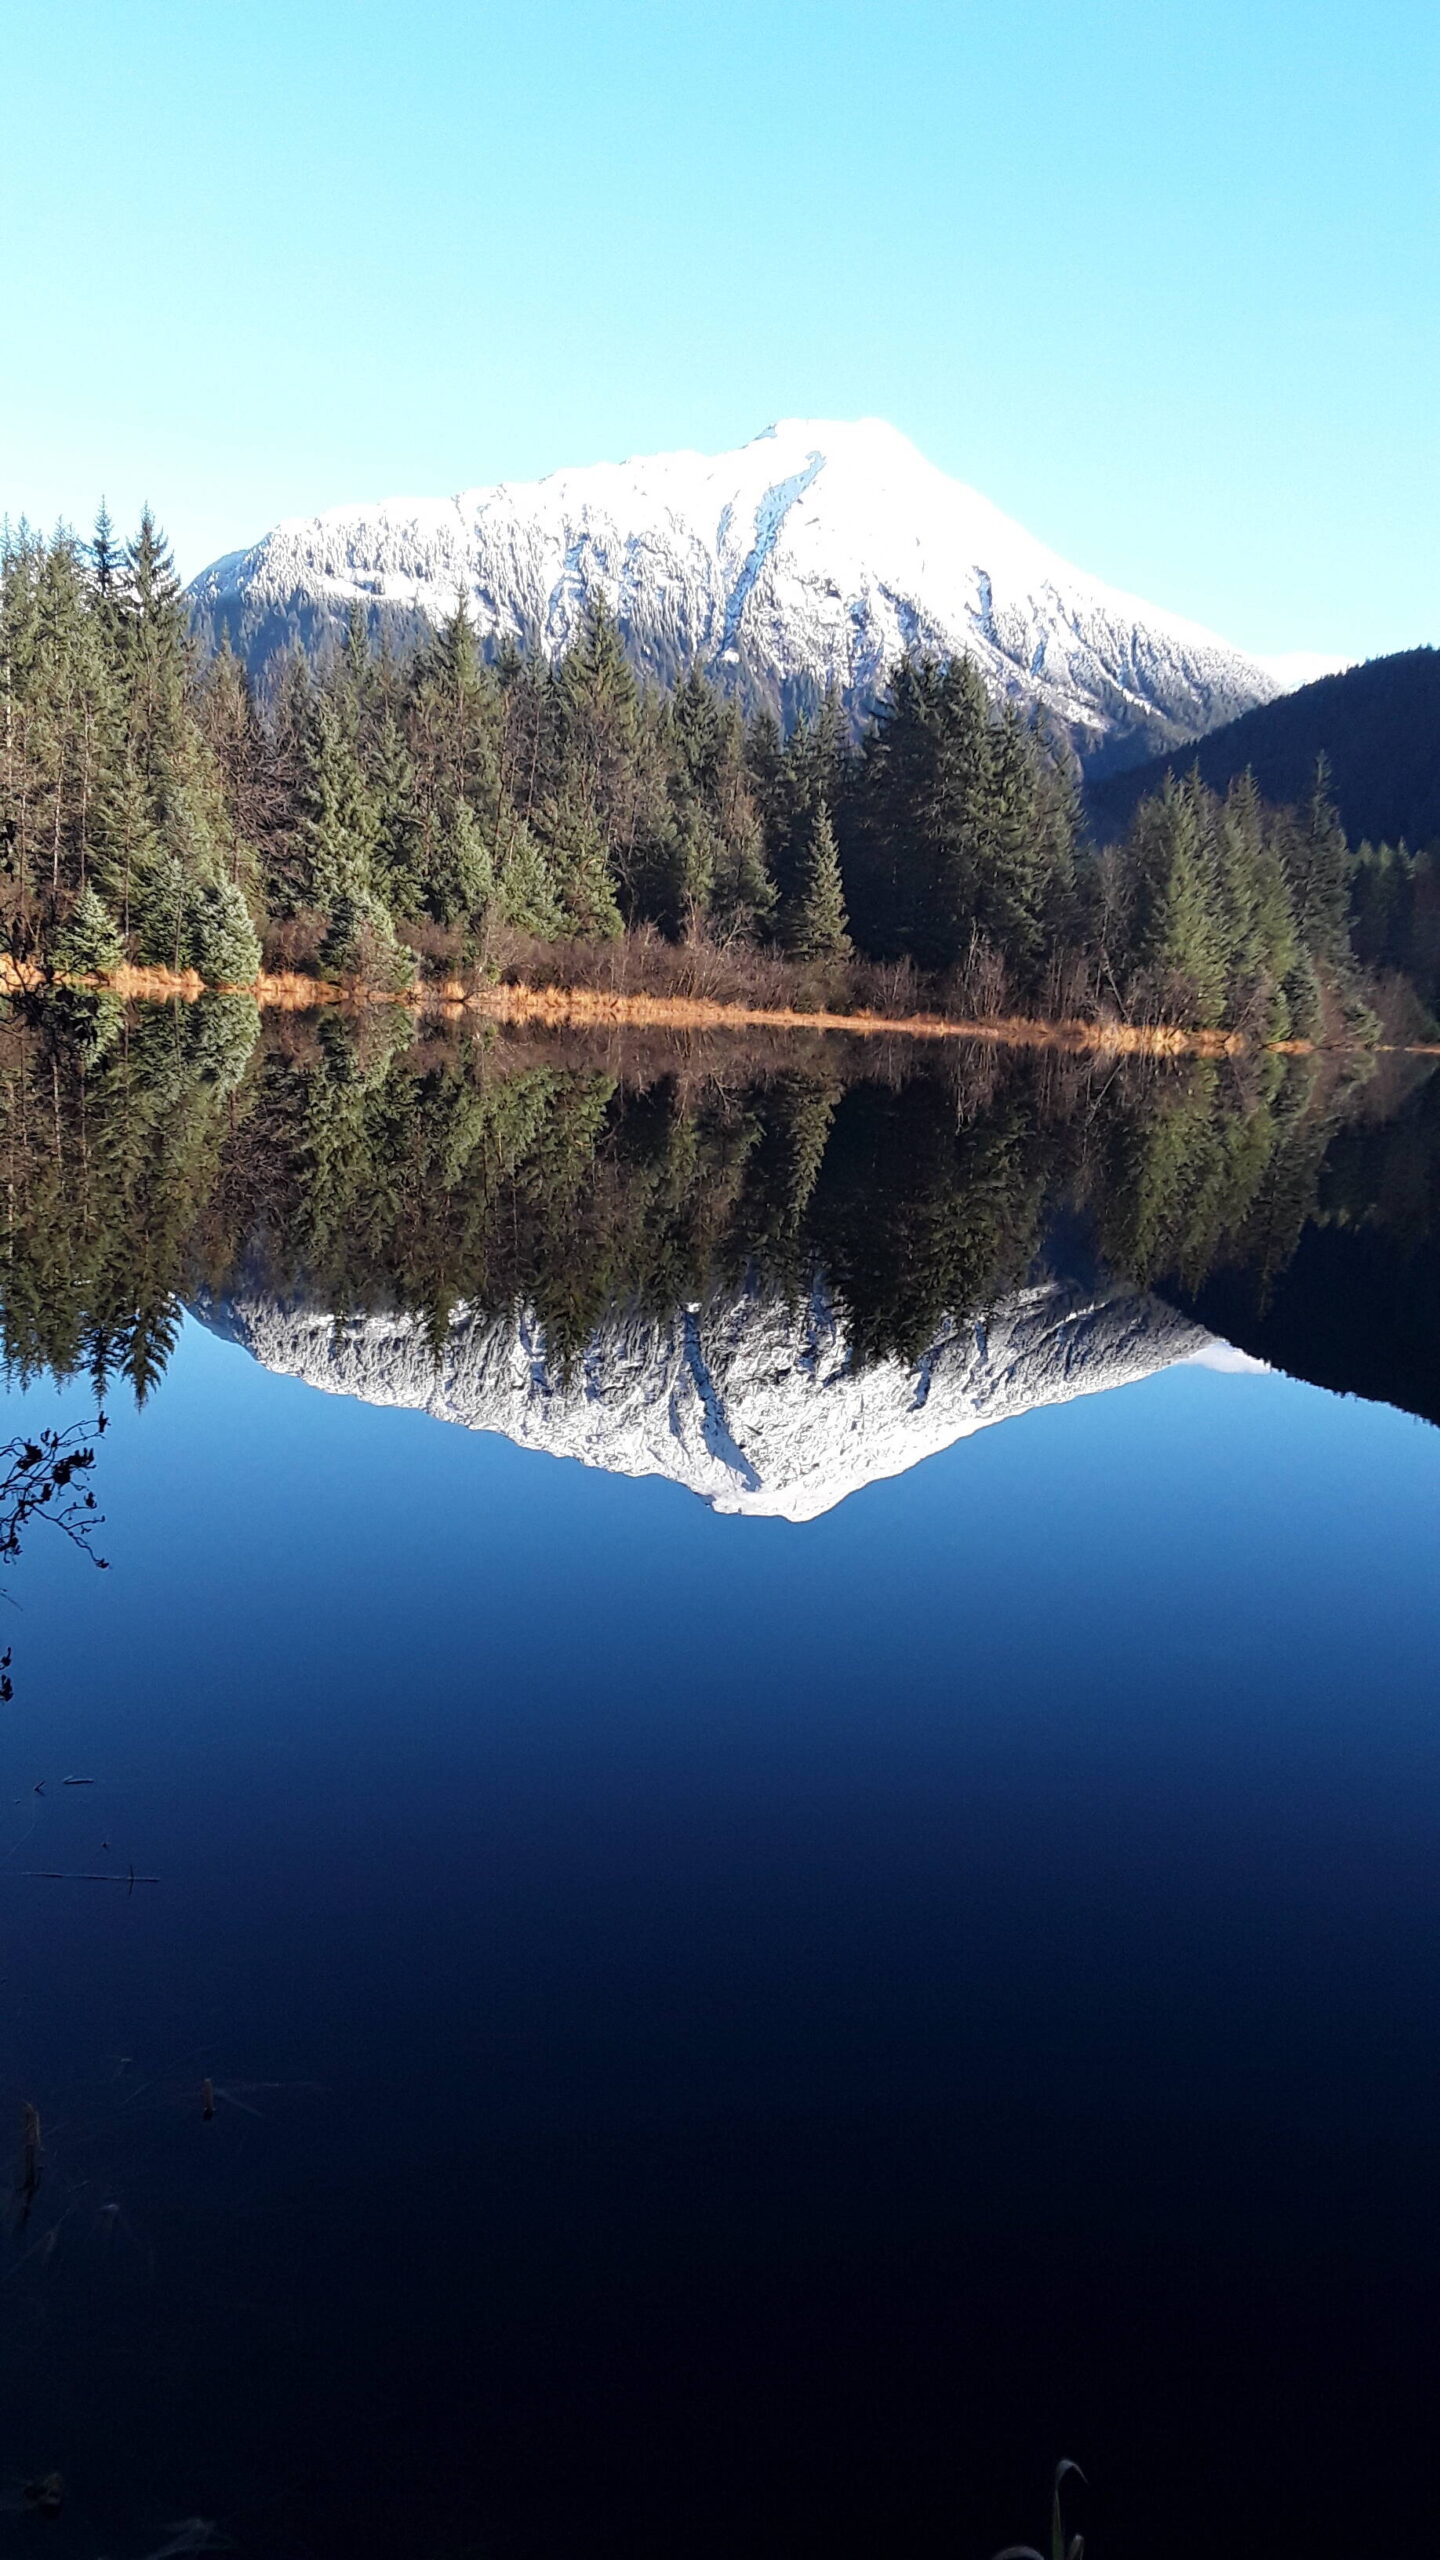 A mirror image at Crystal Lake, submitted Nov. 13. (Photo by Greg Capito)